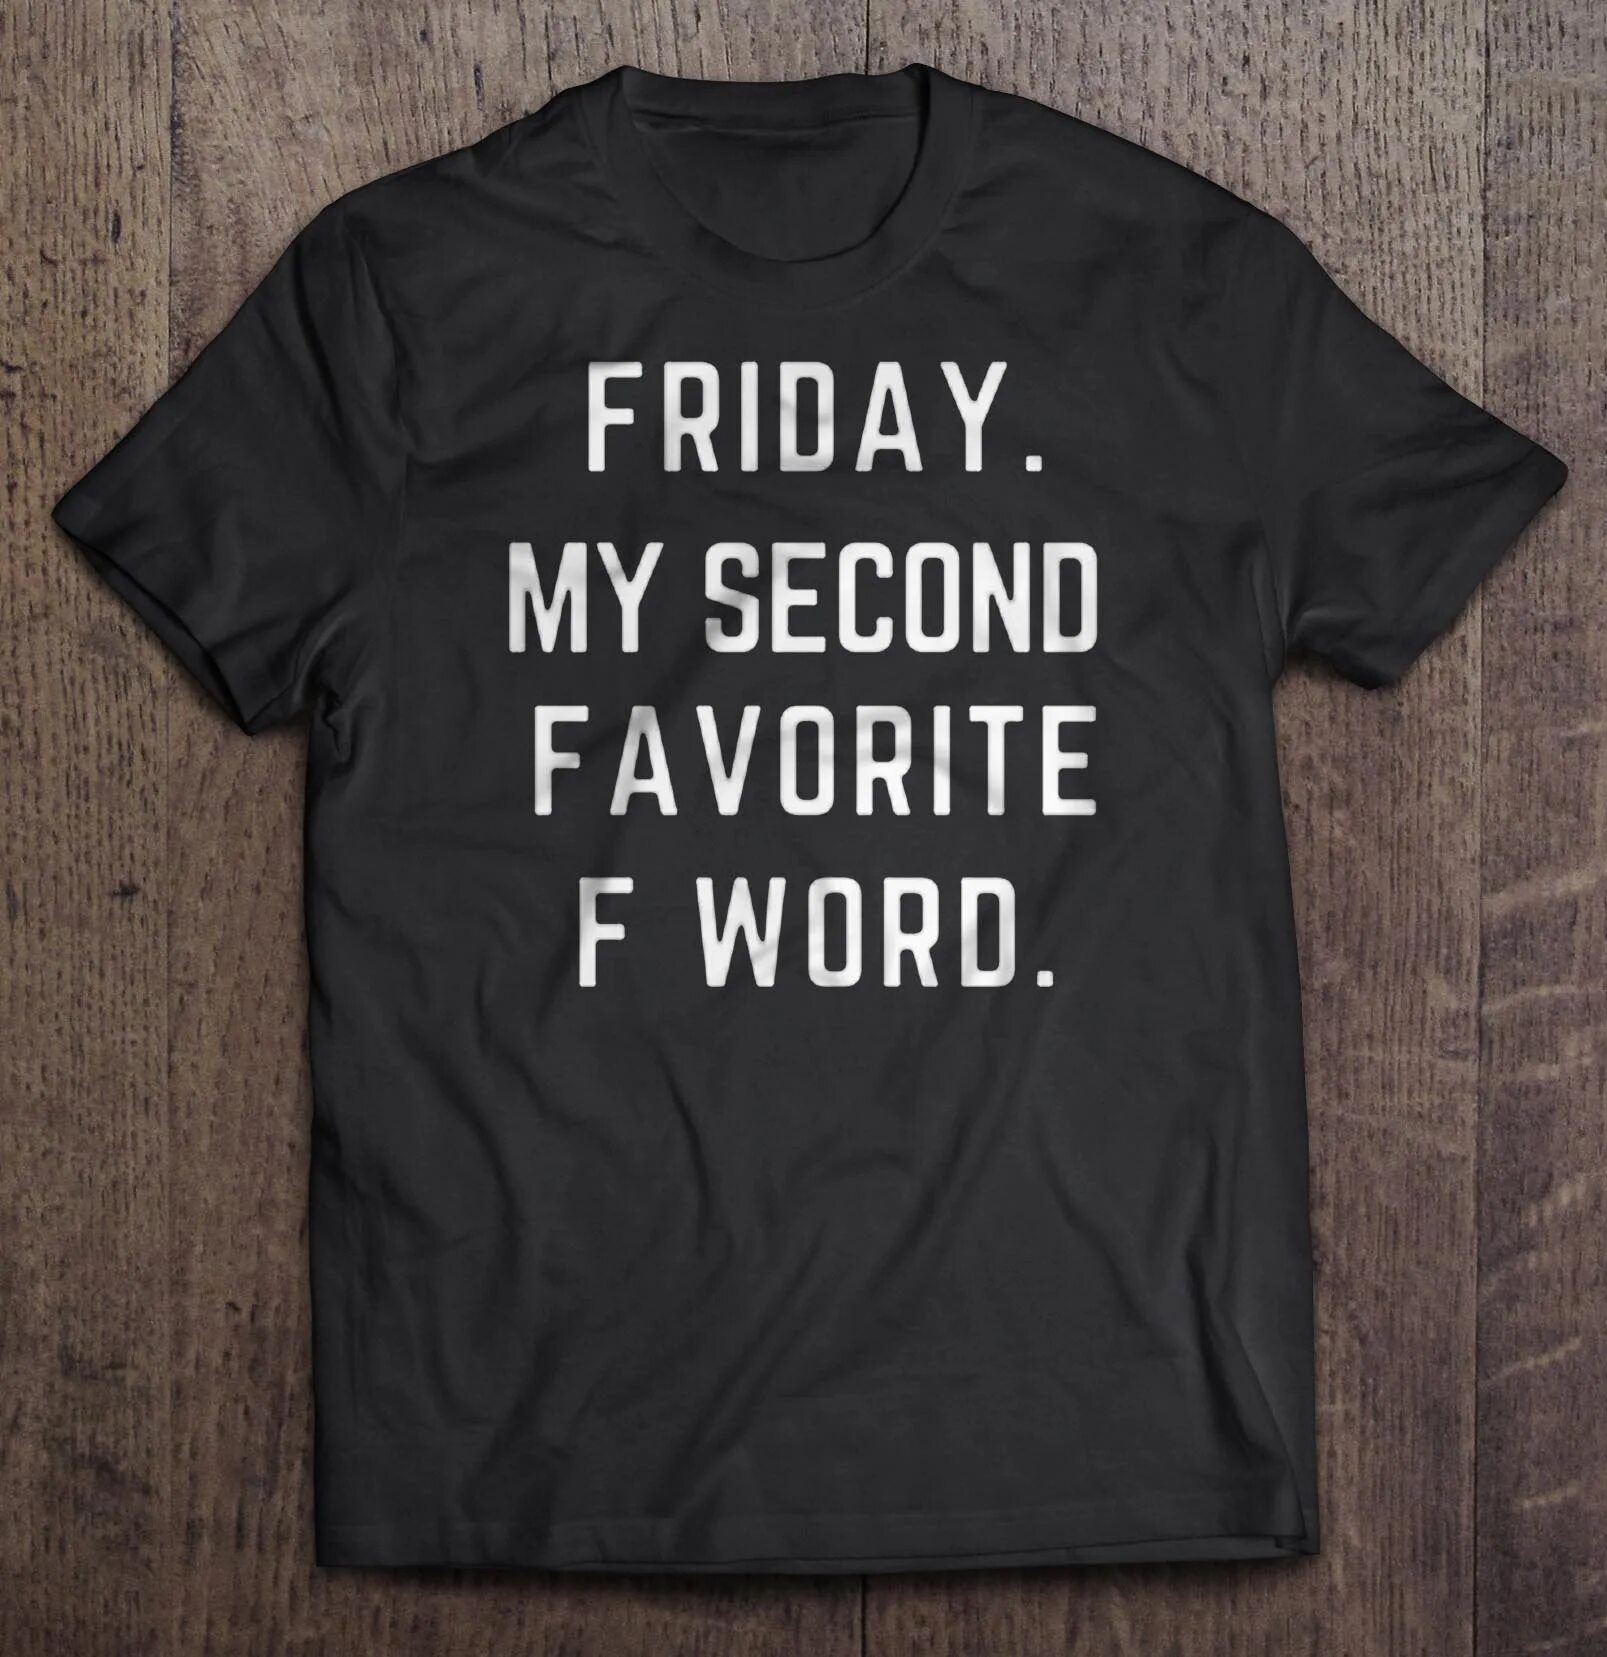 This my friday. Friday my second favourite f-Word. Friday is my second favorite f Word. Футболка Friday is coming soon. Футболка Фрайдей эвридей.